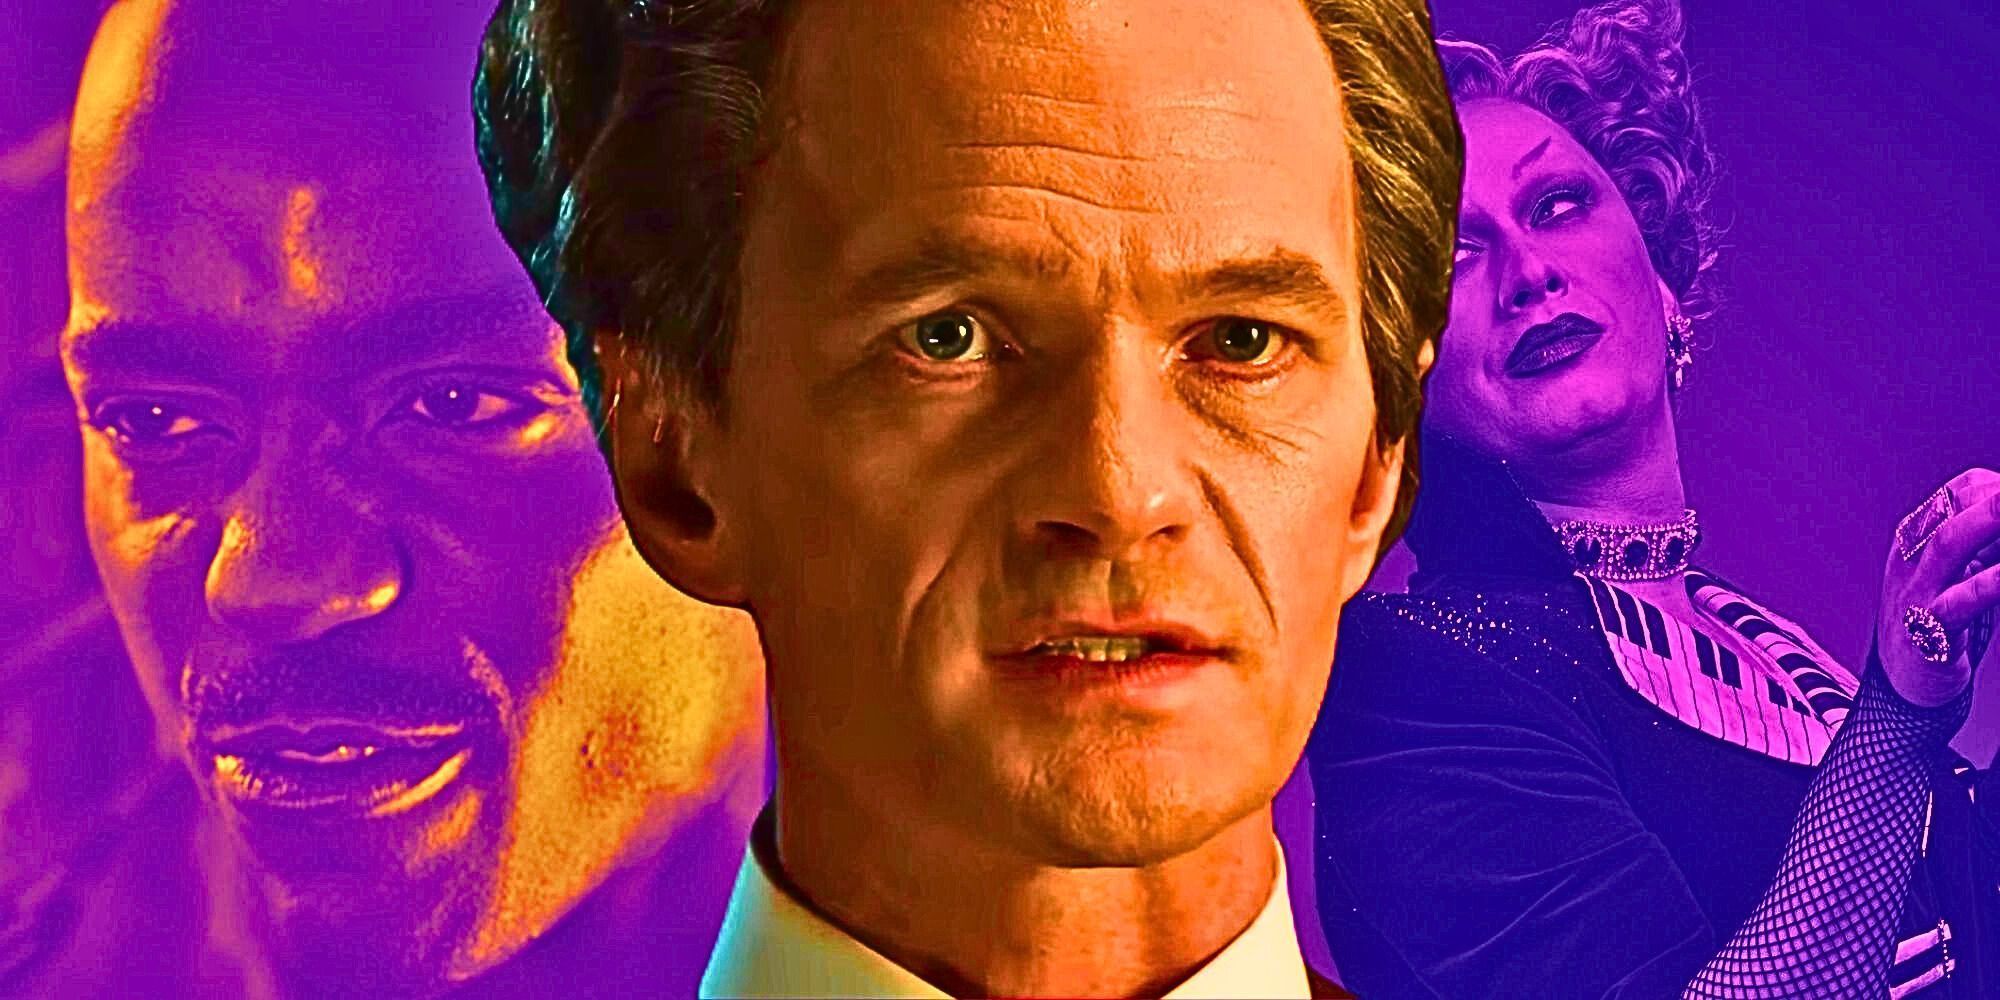 A custom image of Neil Patrick Harris as the Toymaker against a backdrop of other Doctor Who characters